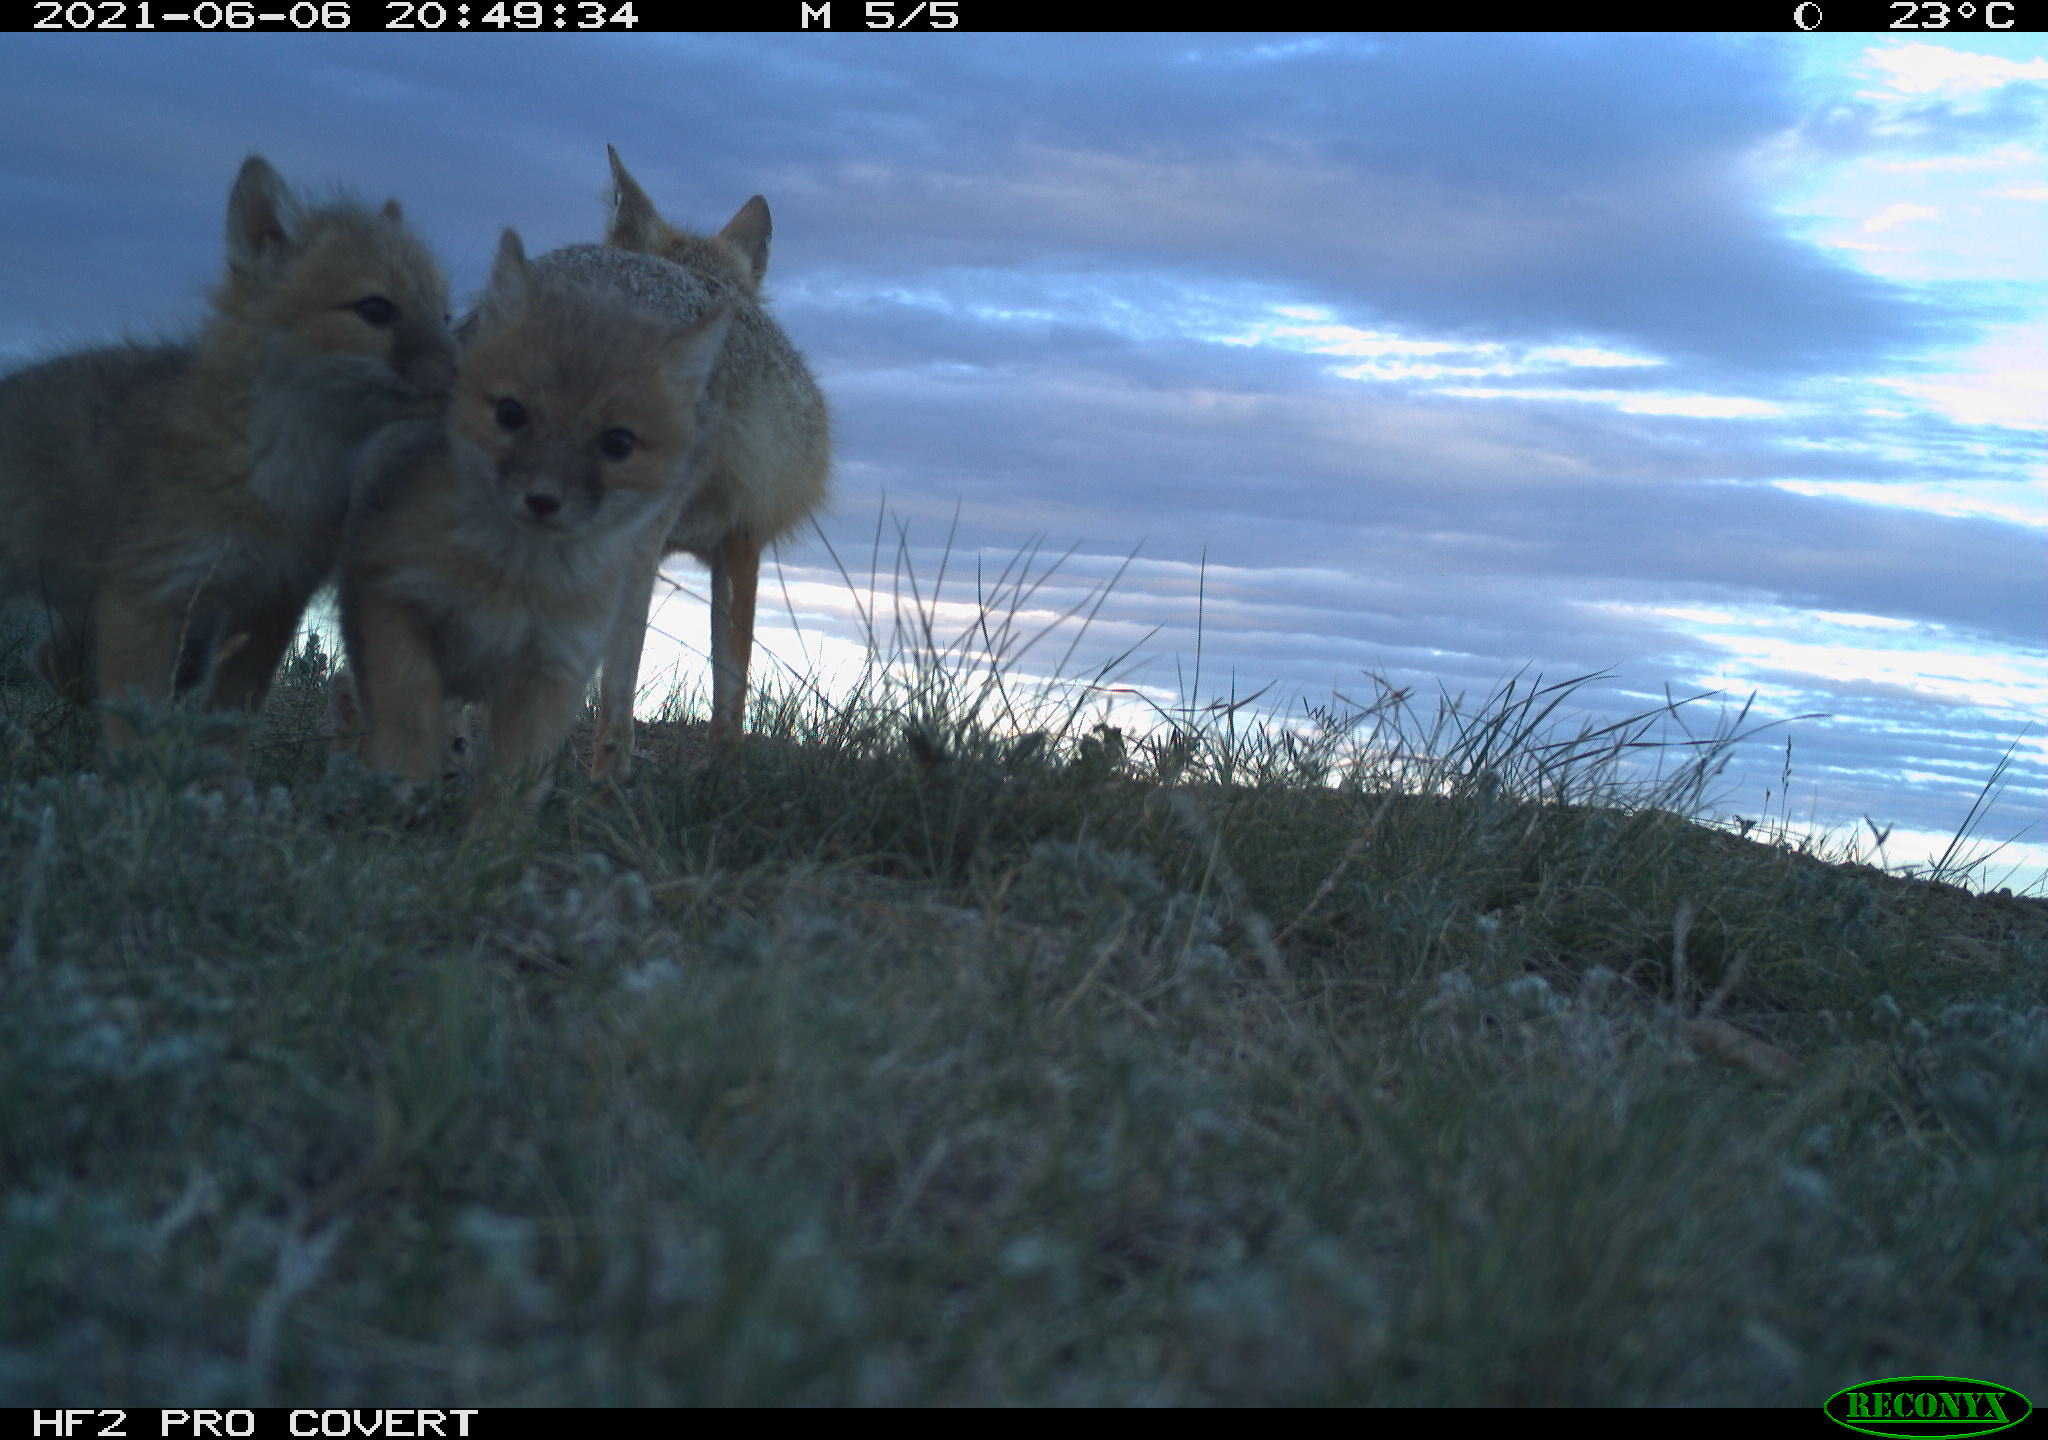 Two swift fox pups huddled together and an adult fox standing nearby at dusk on the prairie 